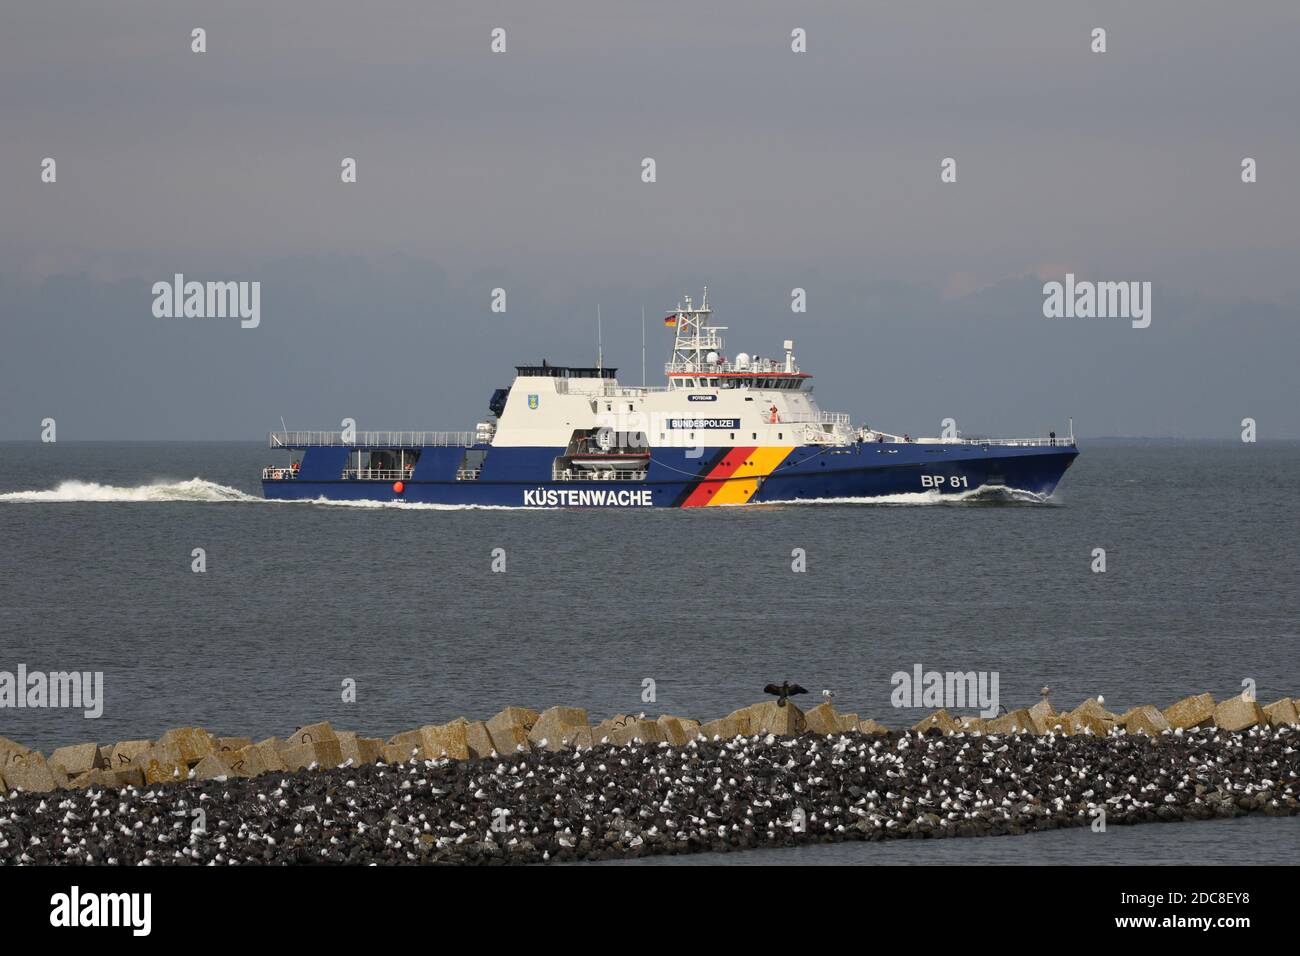 The ship of the German Coast Guard Potsdam will pass Cuxhaven on the river Elbe on August 20, 2020. Stock Photo